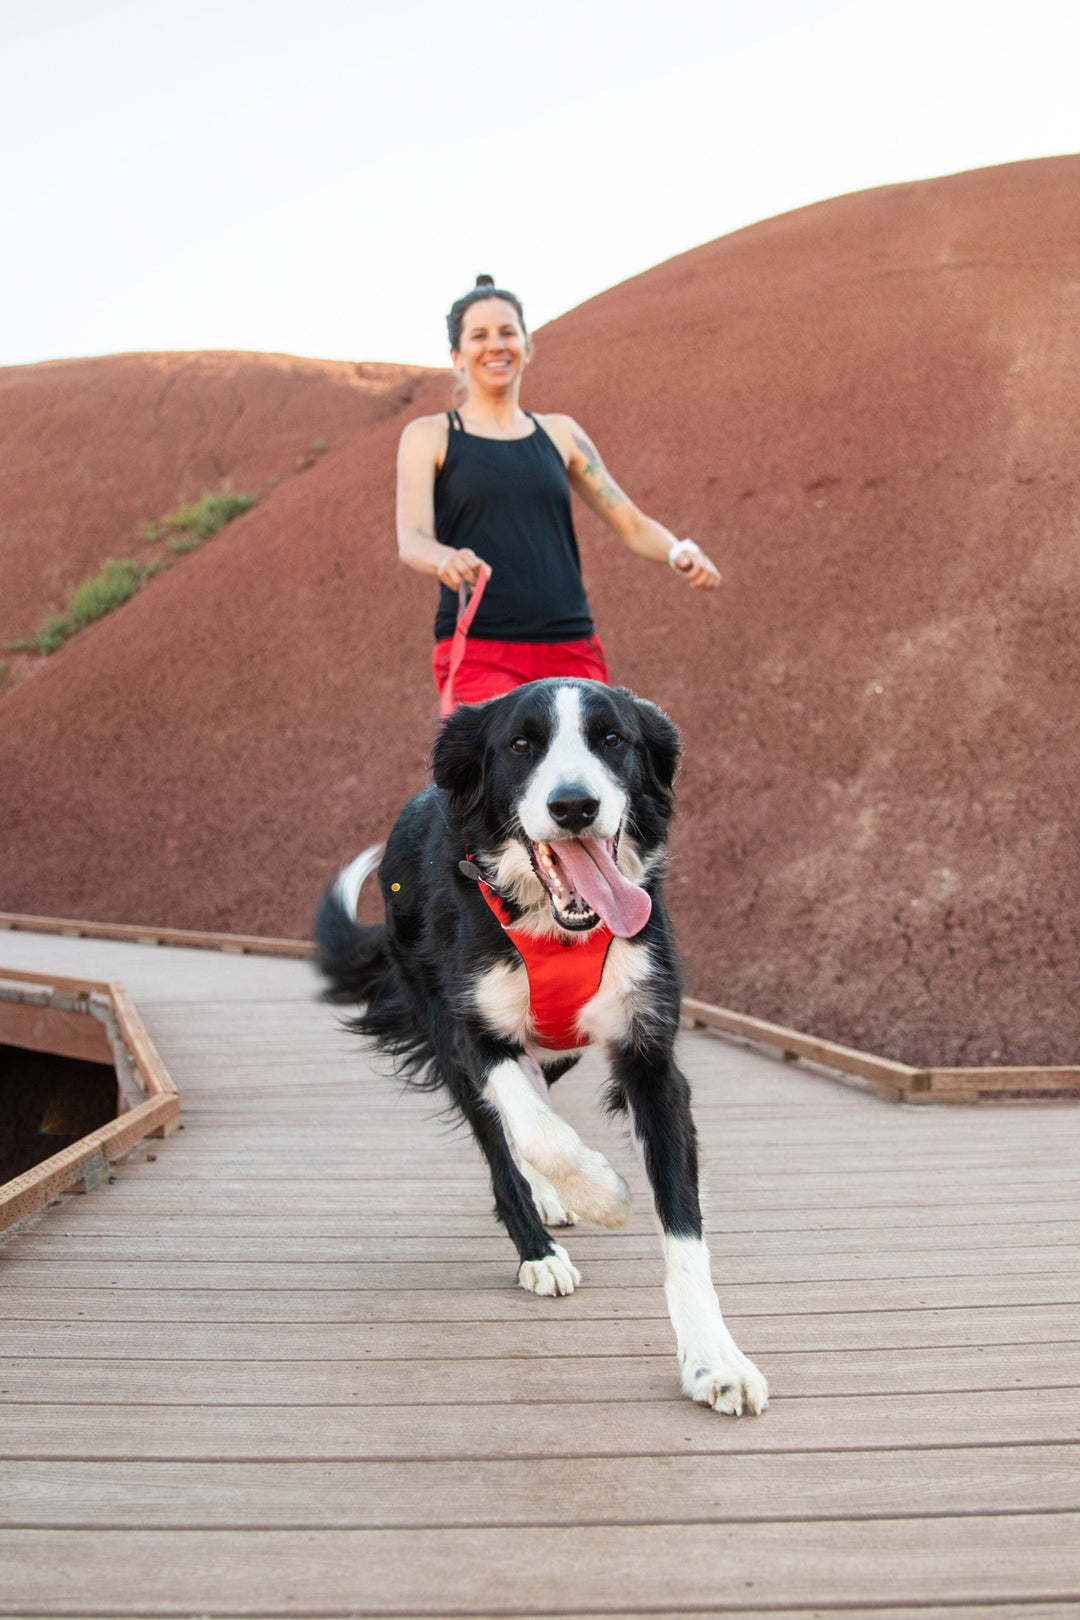 Ruffwear Front Range Harness: Lightweight, Comfortable, and Easy-to-Use Harness in Red Sumac